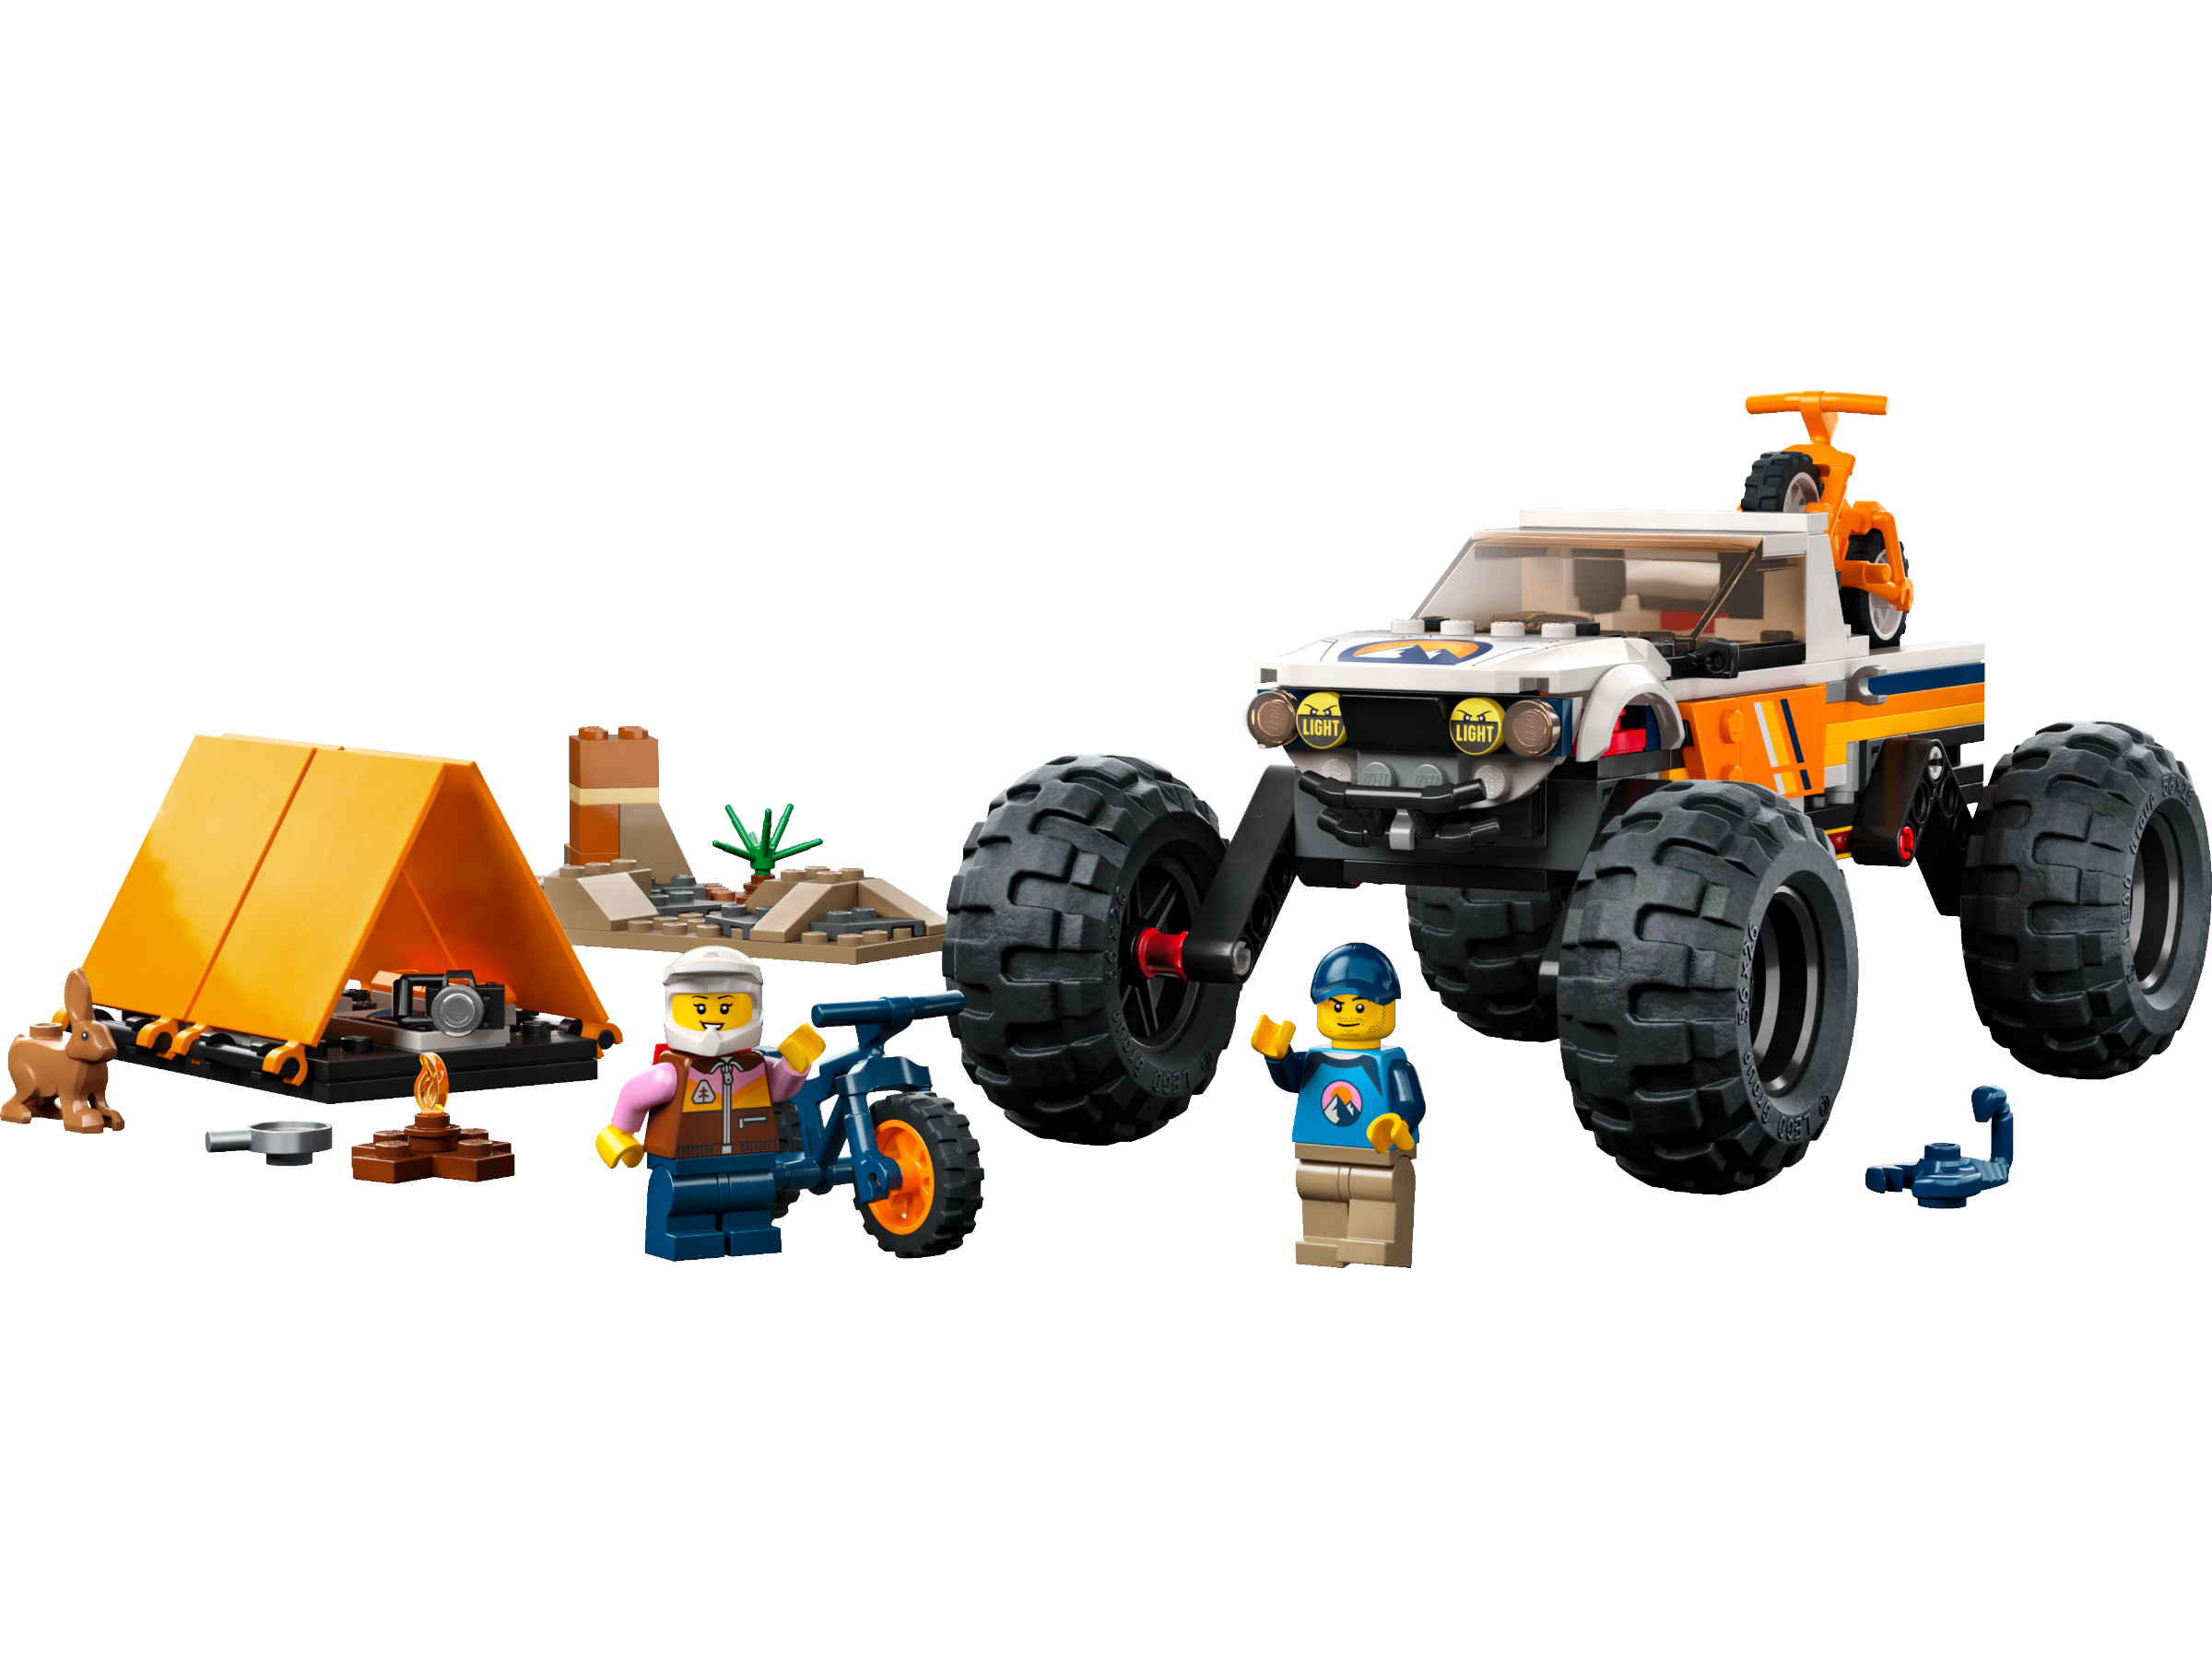 Shop | 60387 Buy Off-Roader online at US City Adventures | LEGO® 4x4 Official the